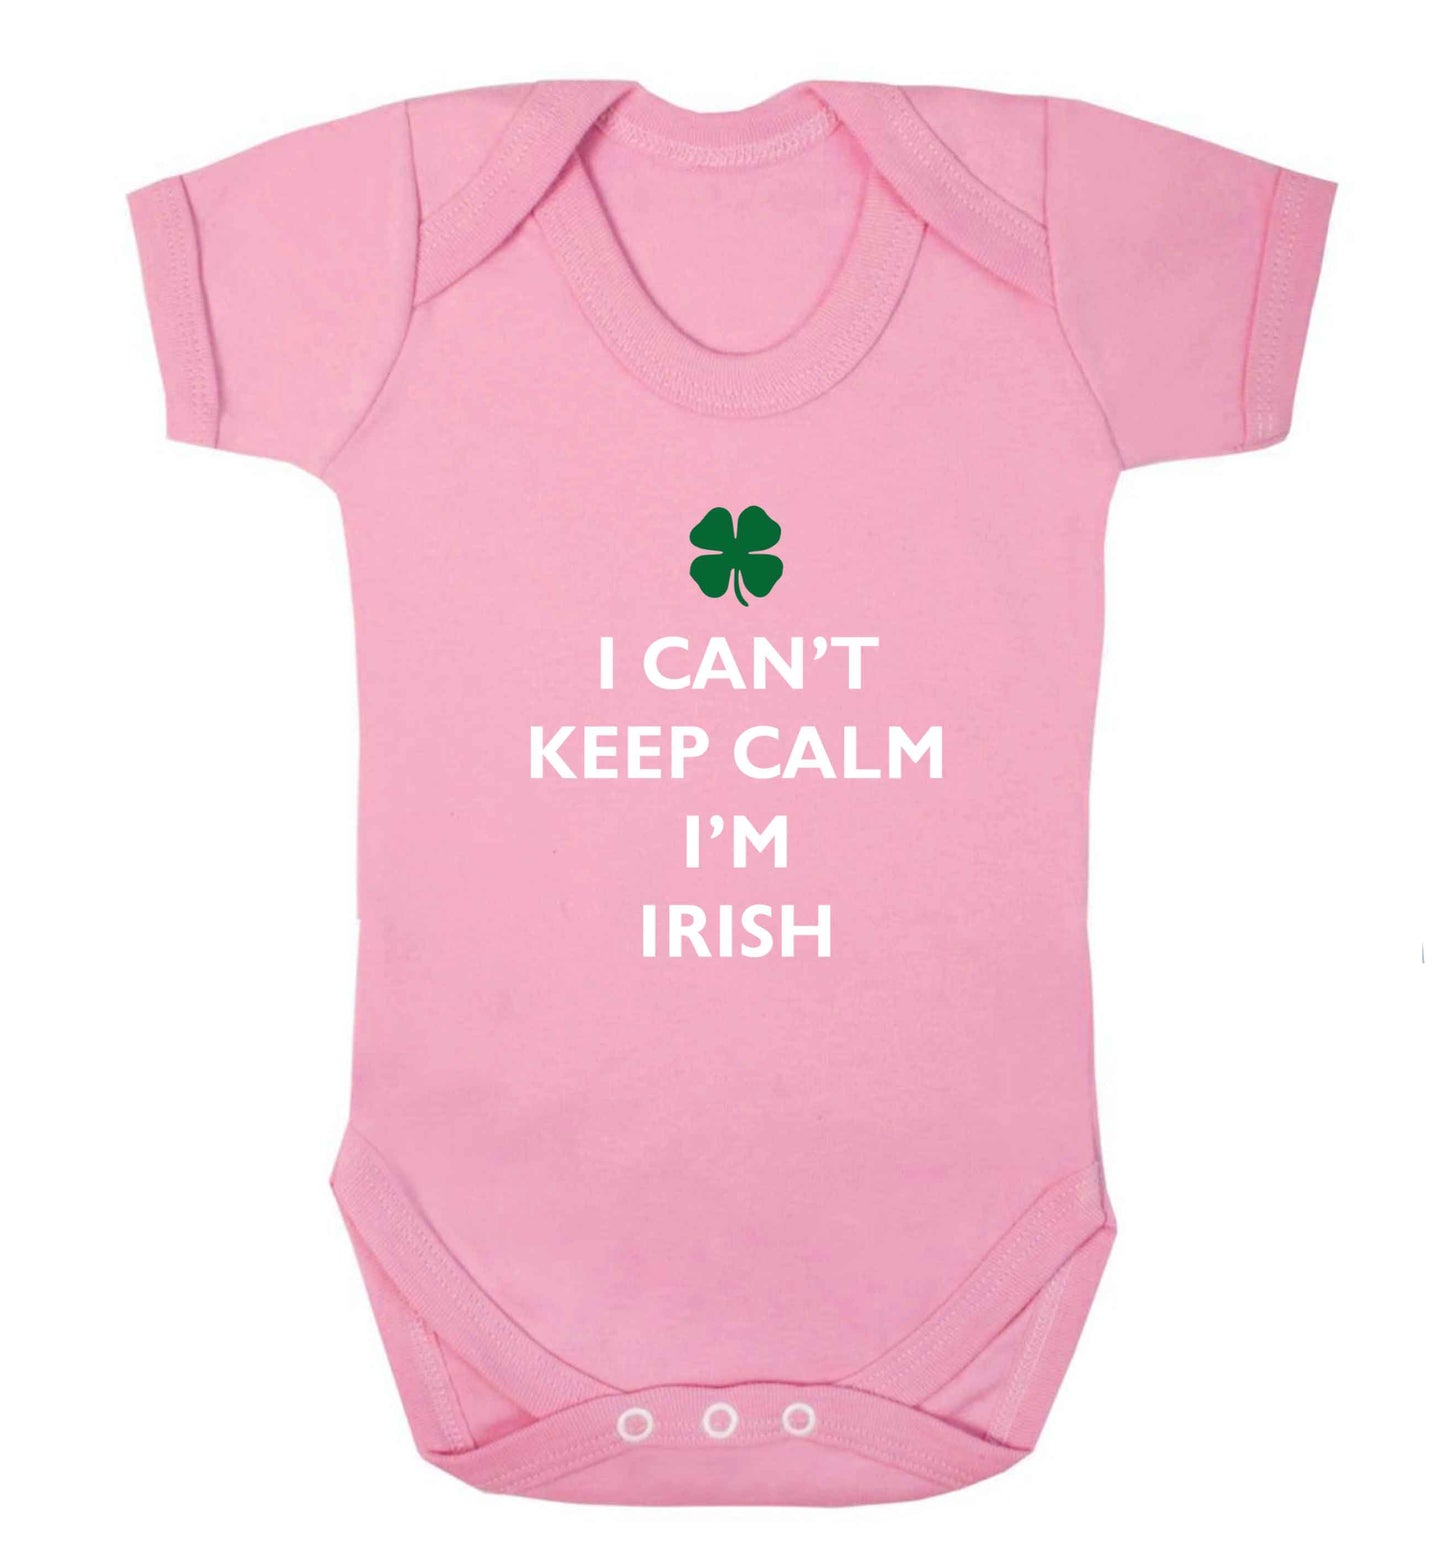 I can't keep calm I'm Irish baby vest pale pink 18-24 months